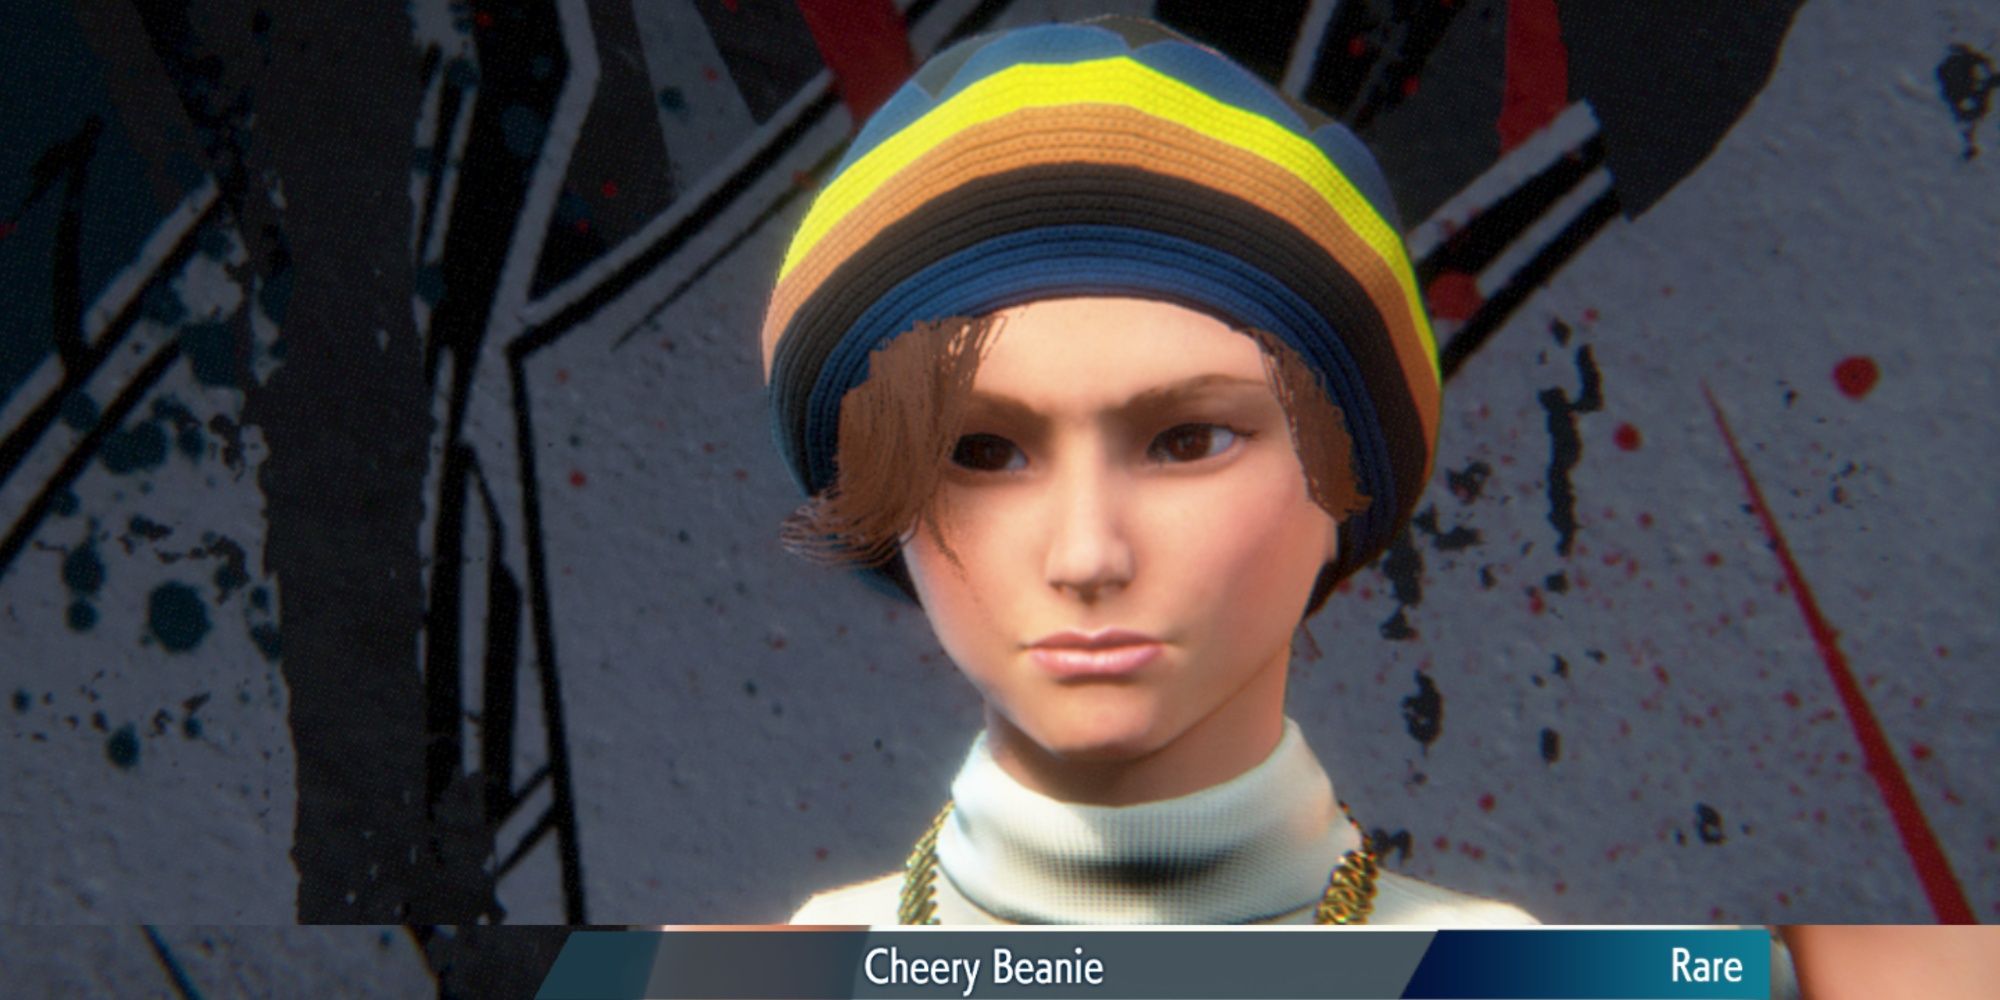 The Cheery Beanie Rare Equipment in Street Fighter 6